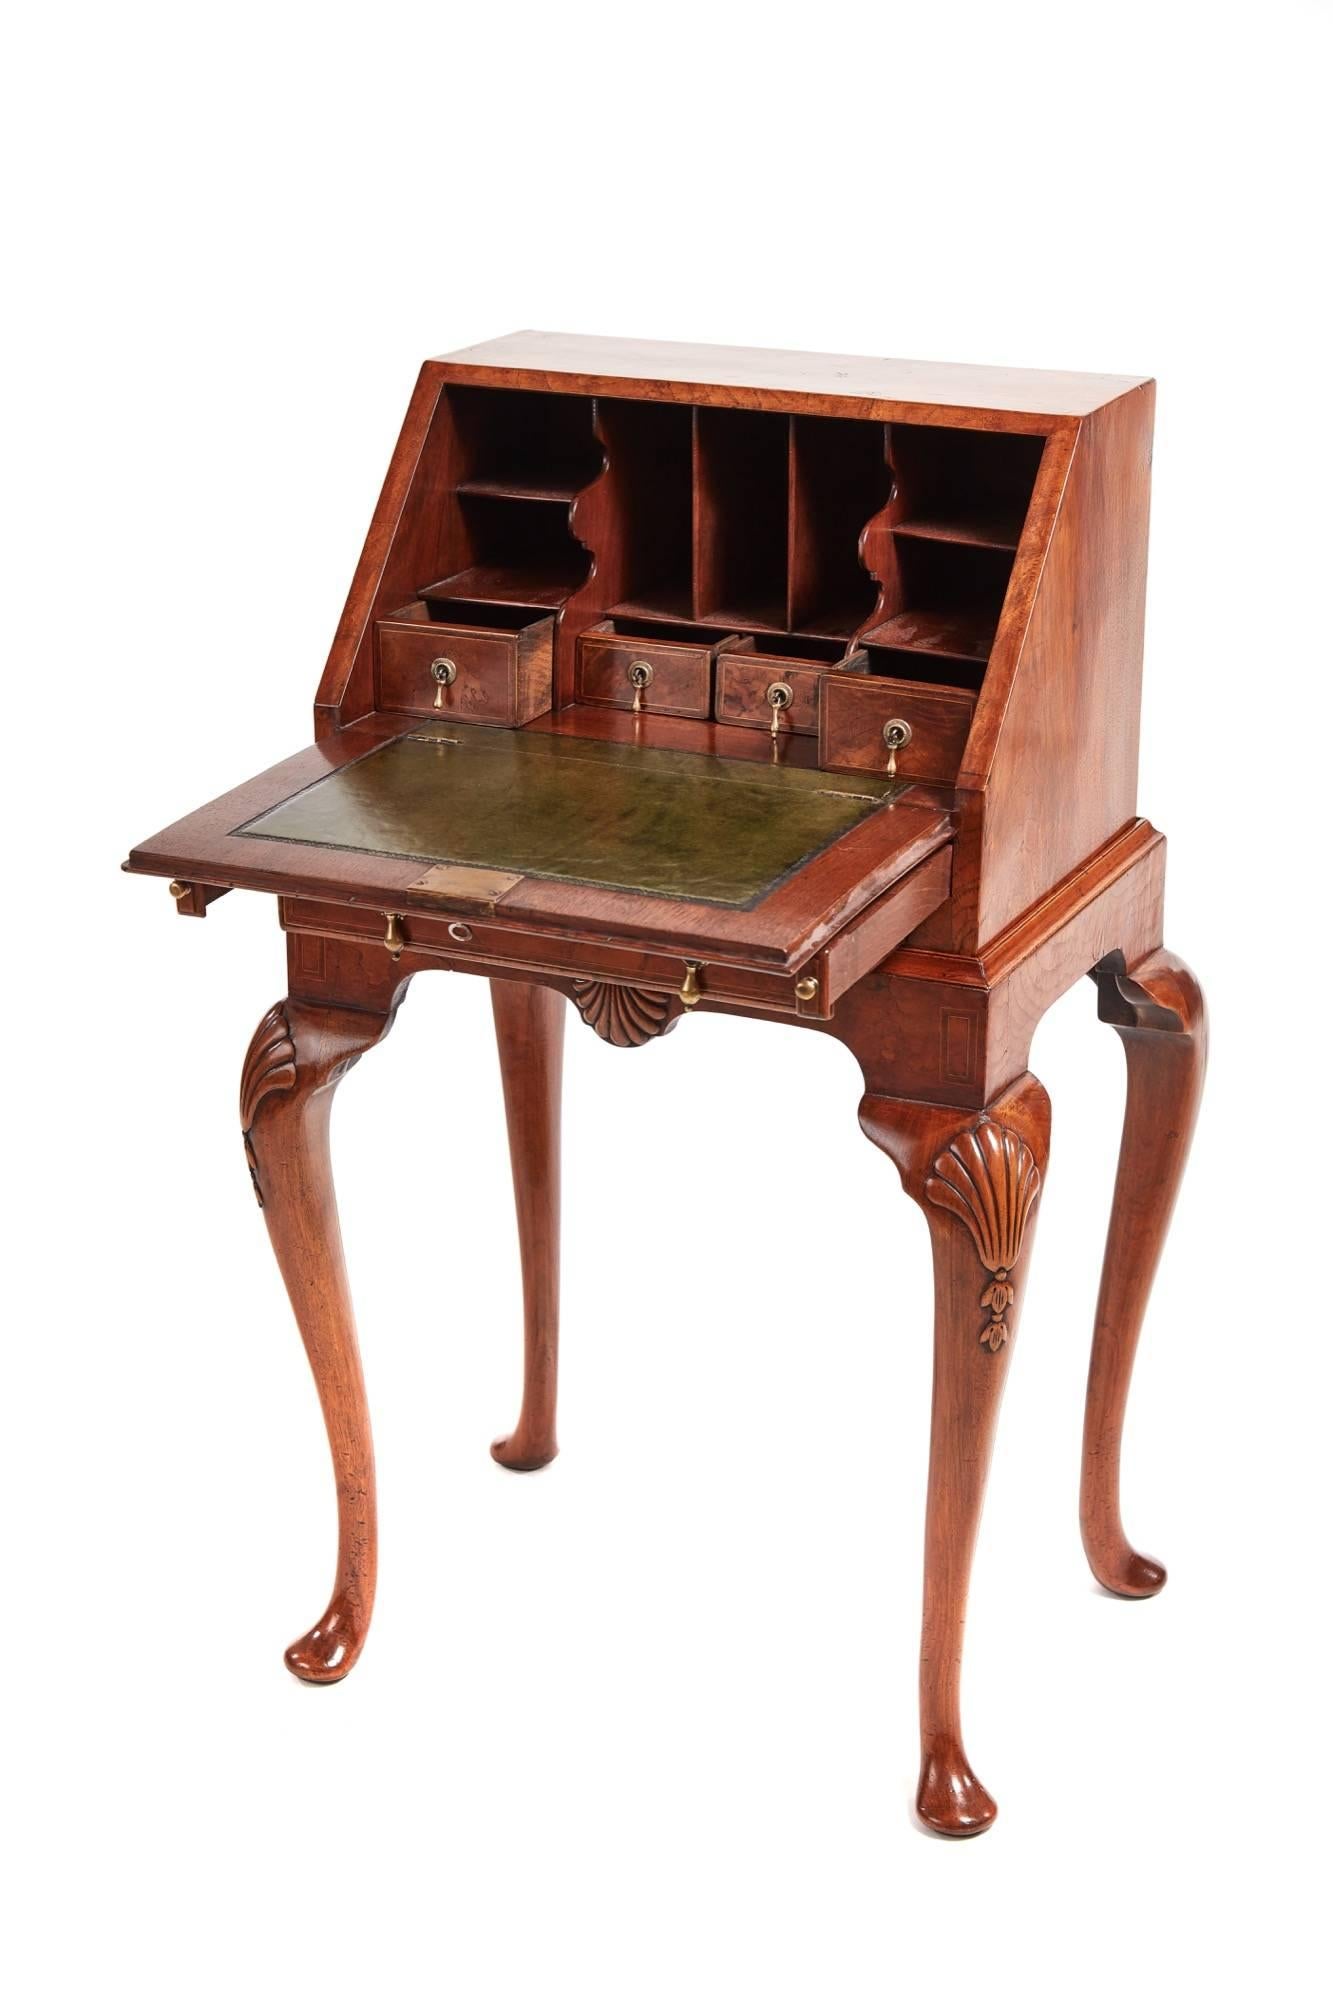 Attractive queen anne style burr walnut bureau, the top, fall and drawer all with herring bone inlay on fine burr walnut, the fall opens to reveal four drawers with original brass handles, a green leather, and shaped pigeon holes, one front drawer